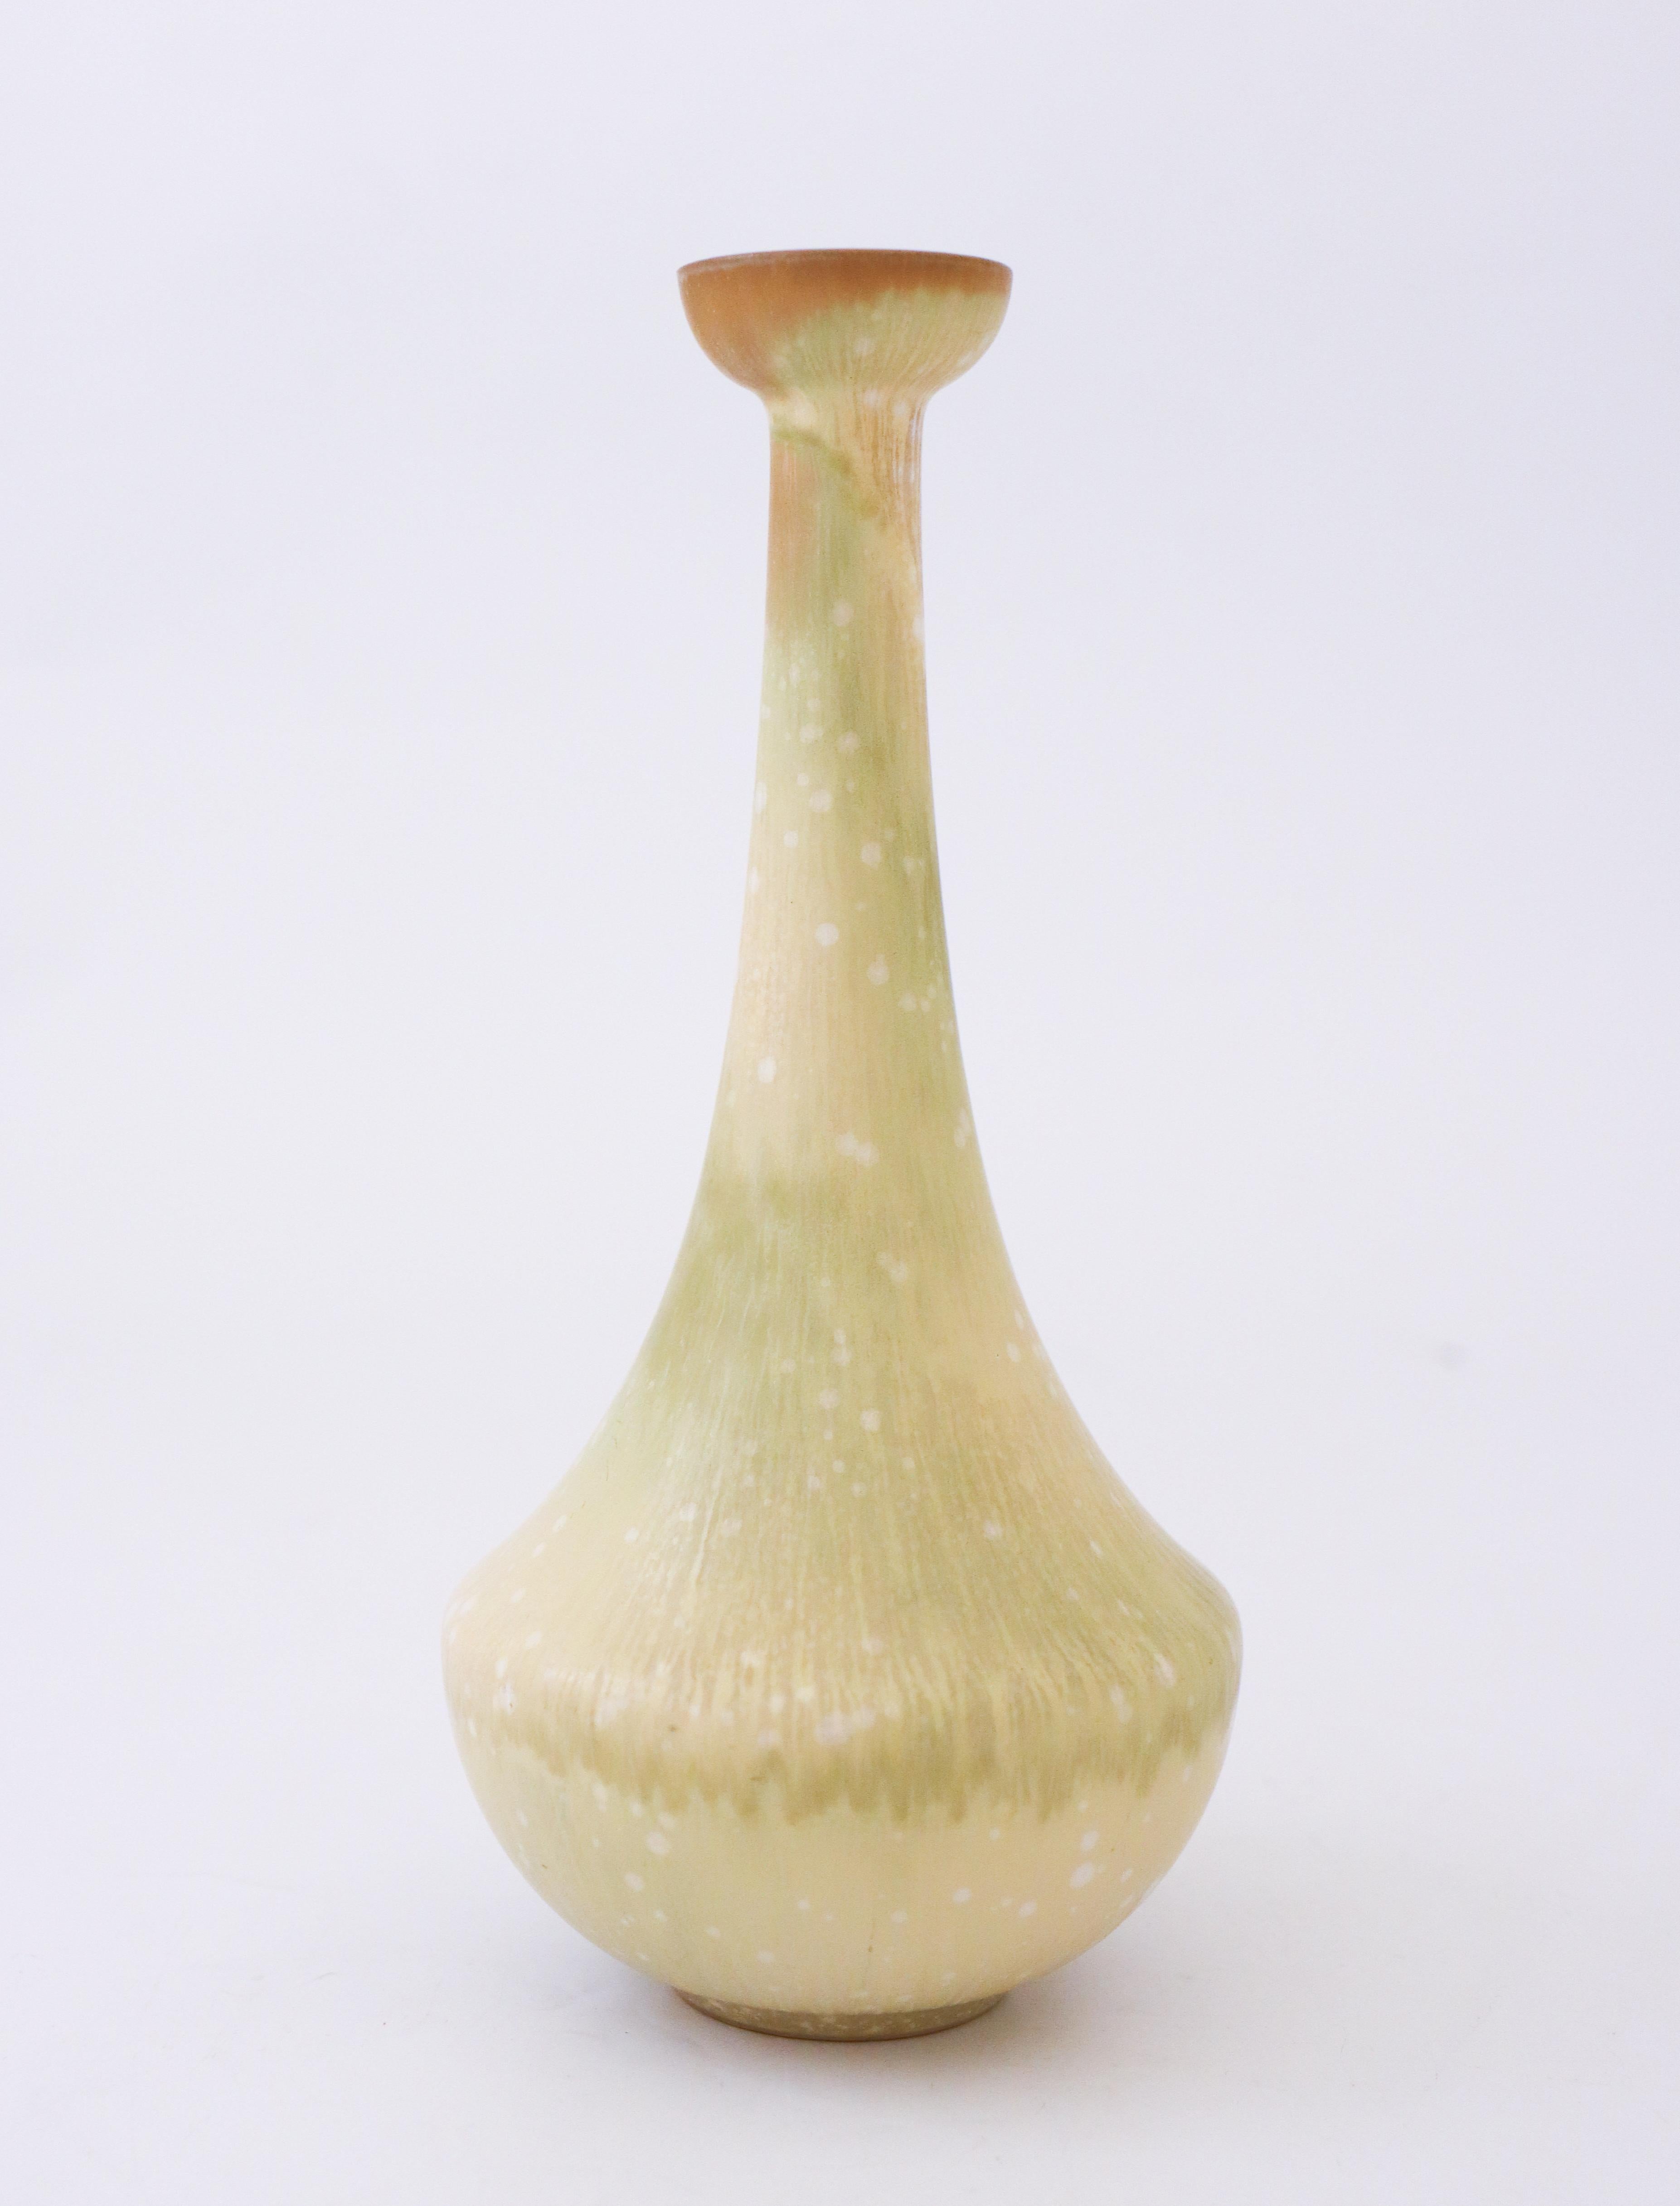 A lovely vase with a green/yellow color designed by Gunnar Nylund at Rörstrand. It is 19 cm high and in mint condition. The vase is marked as 1st quality. 

 